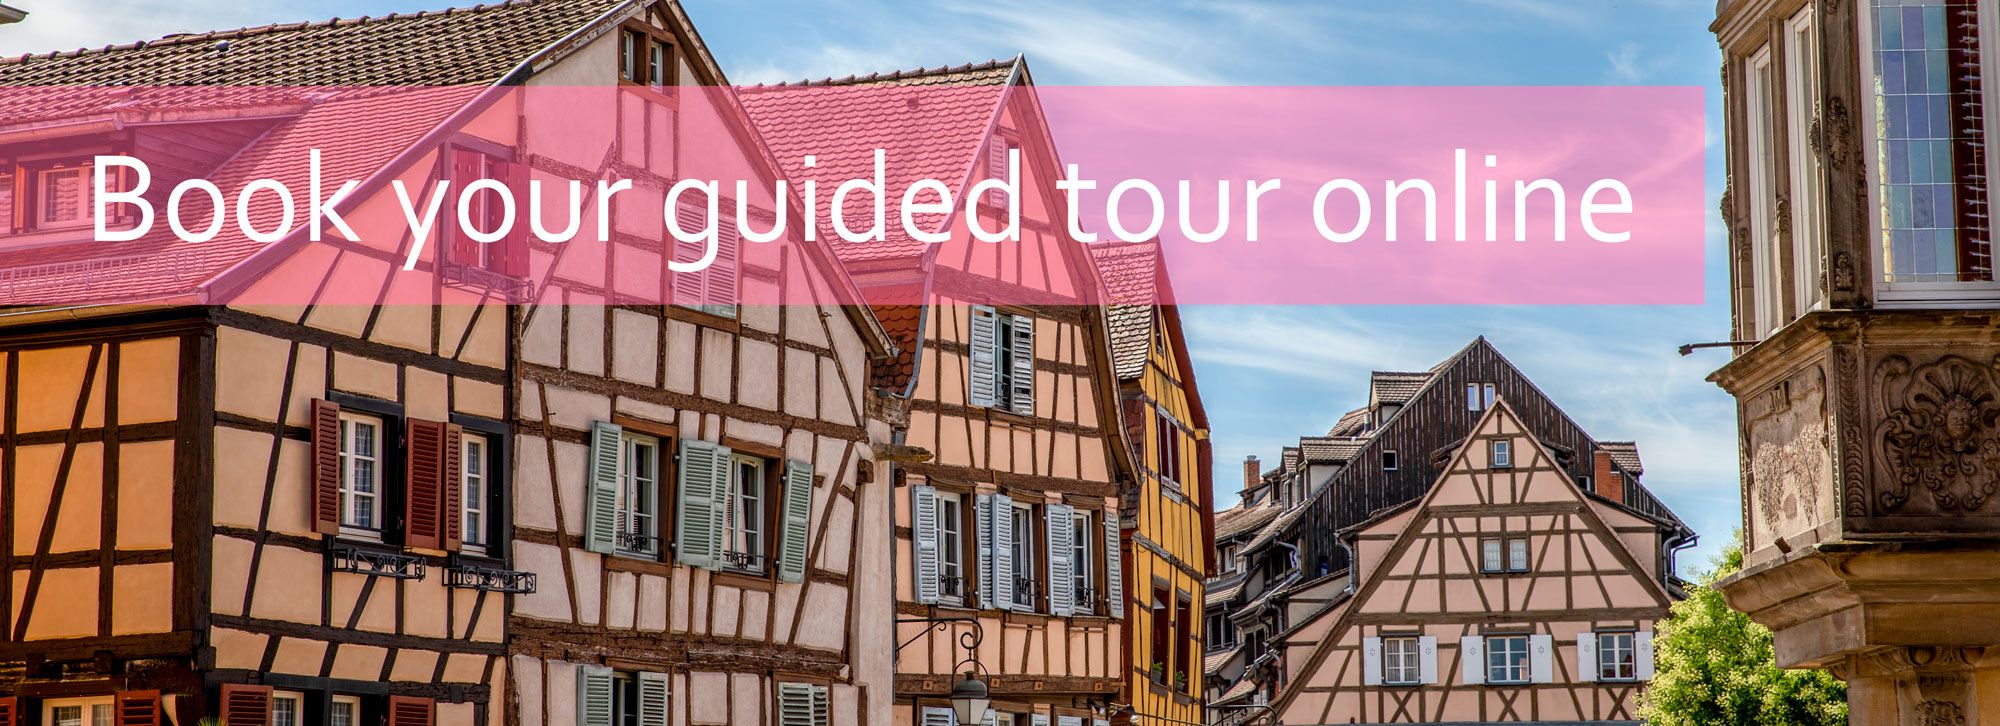 Book your guided tour online